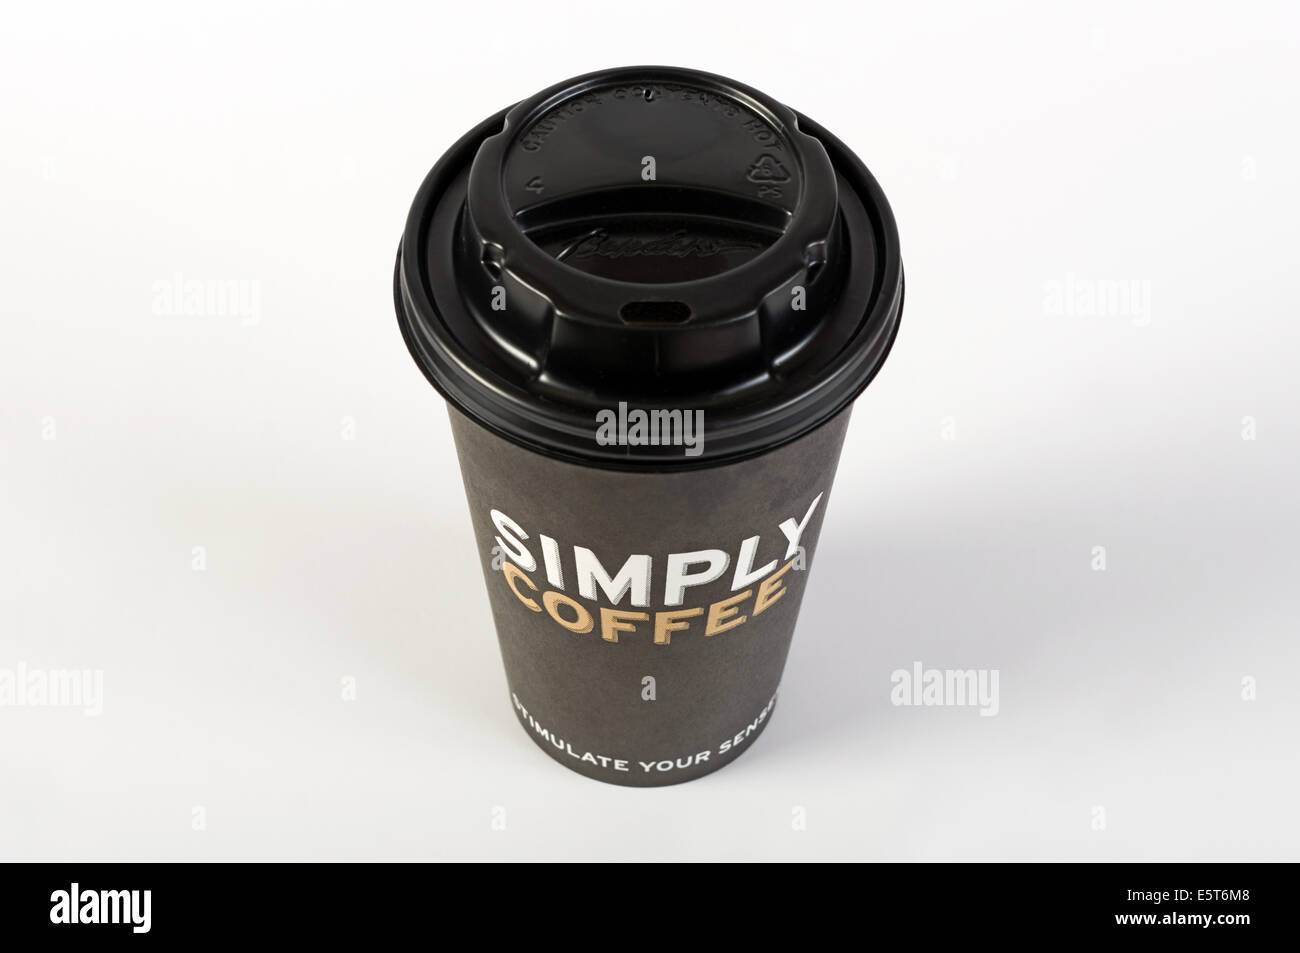 Simply Coffee disposable cup Stock Photo